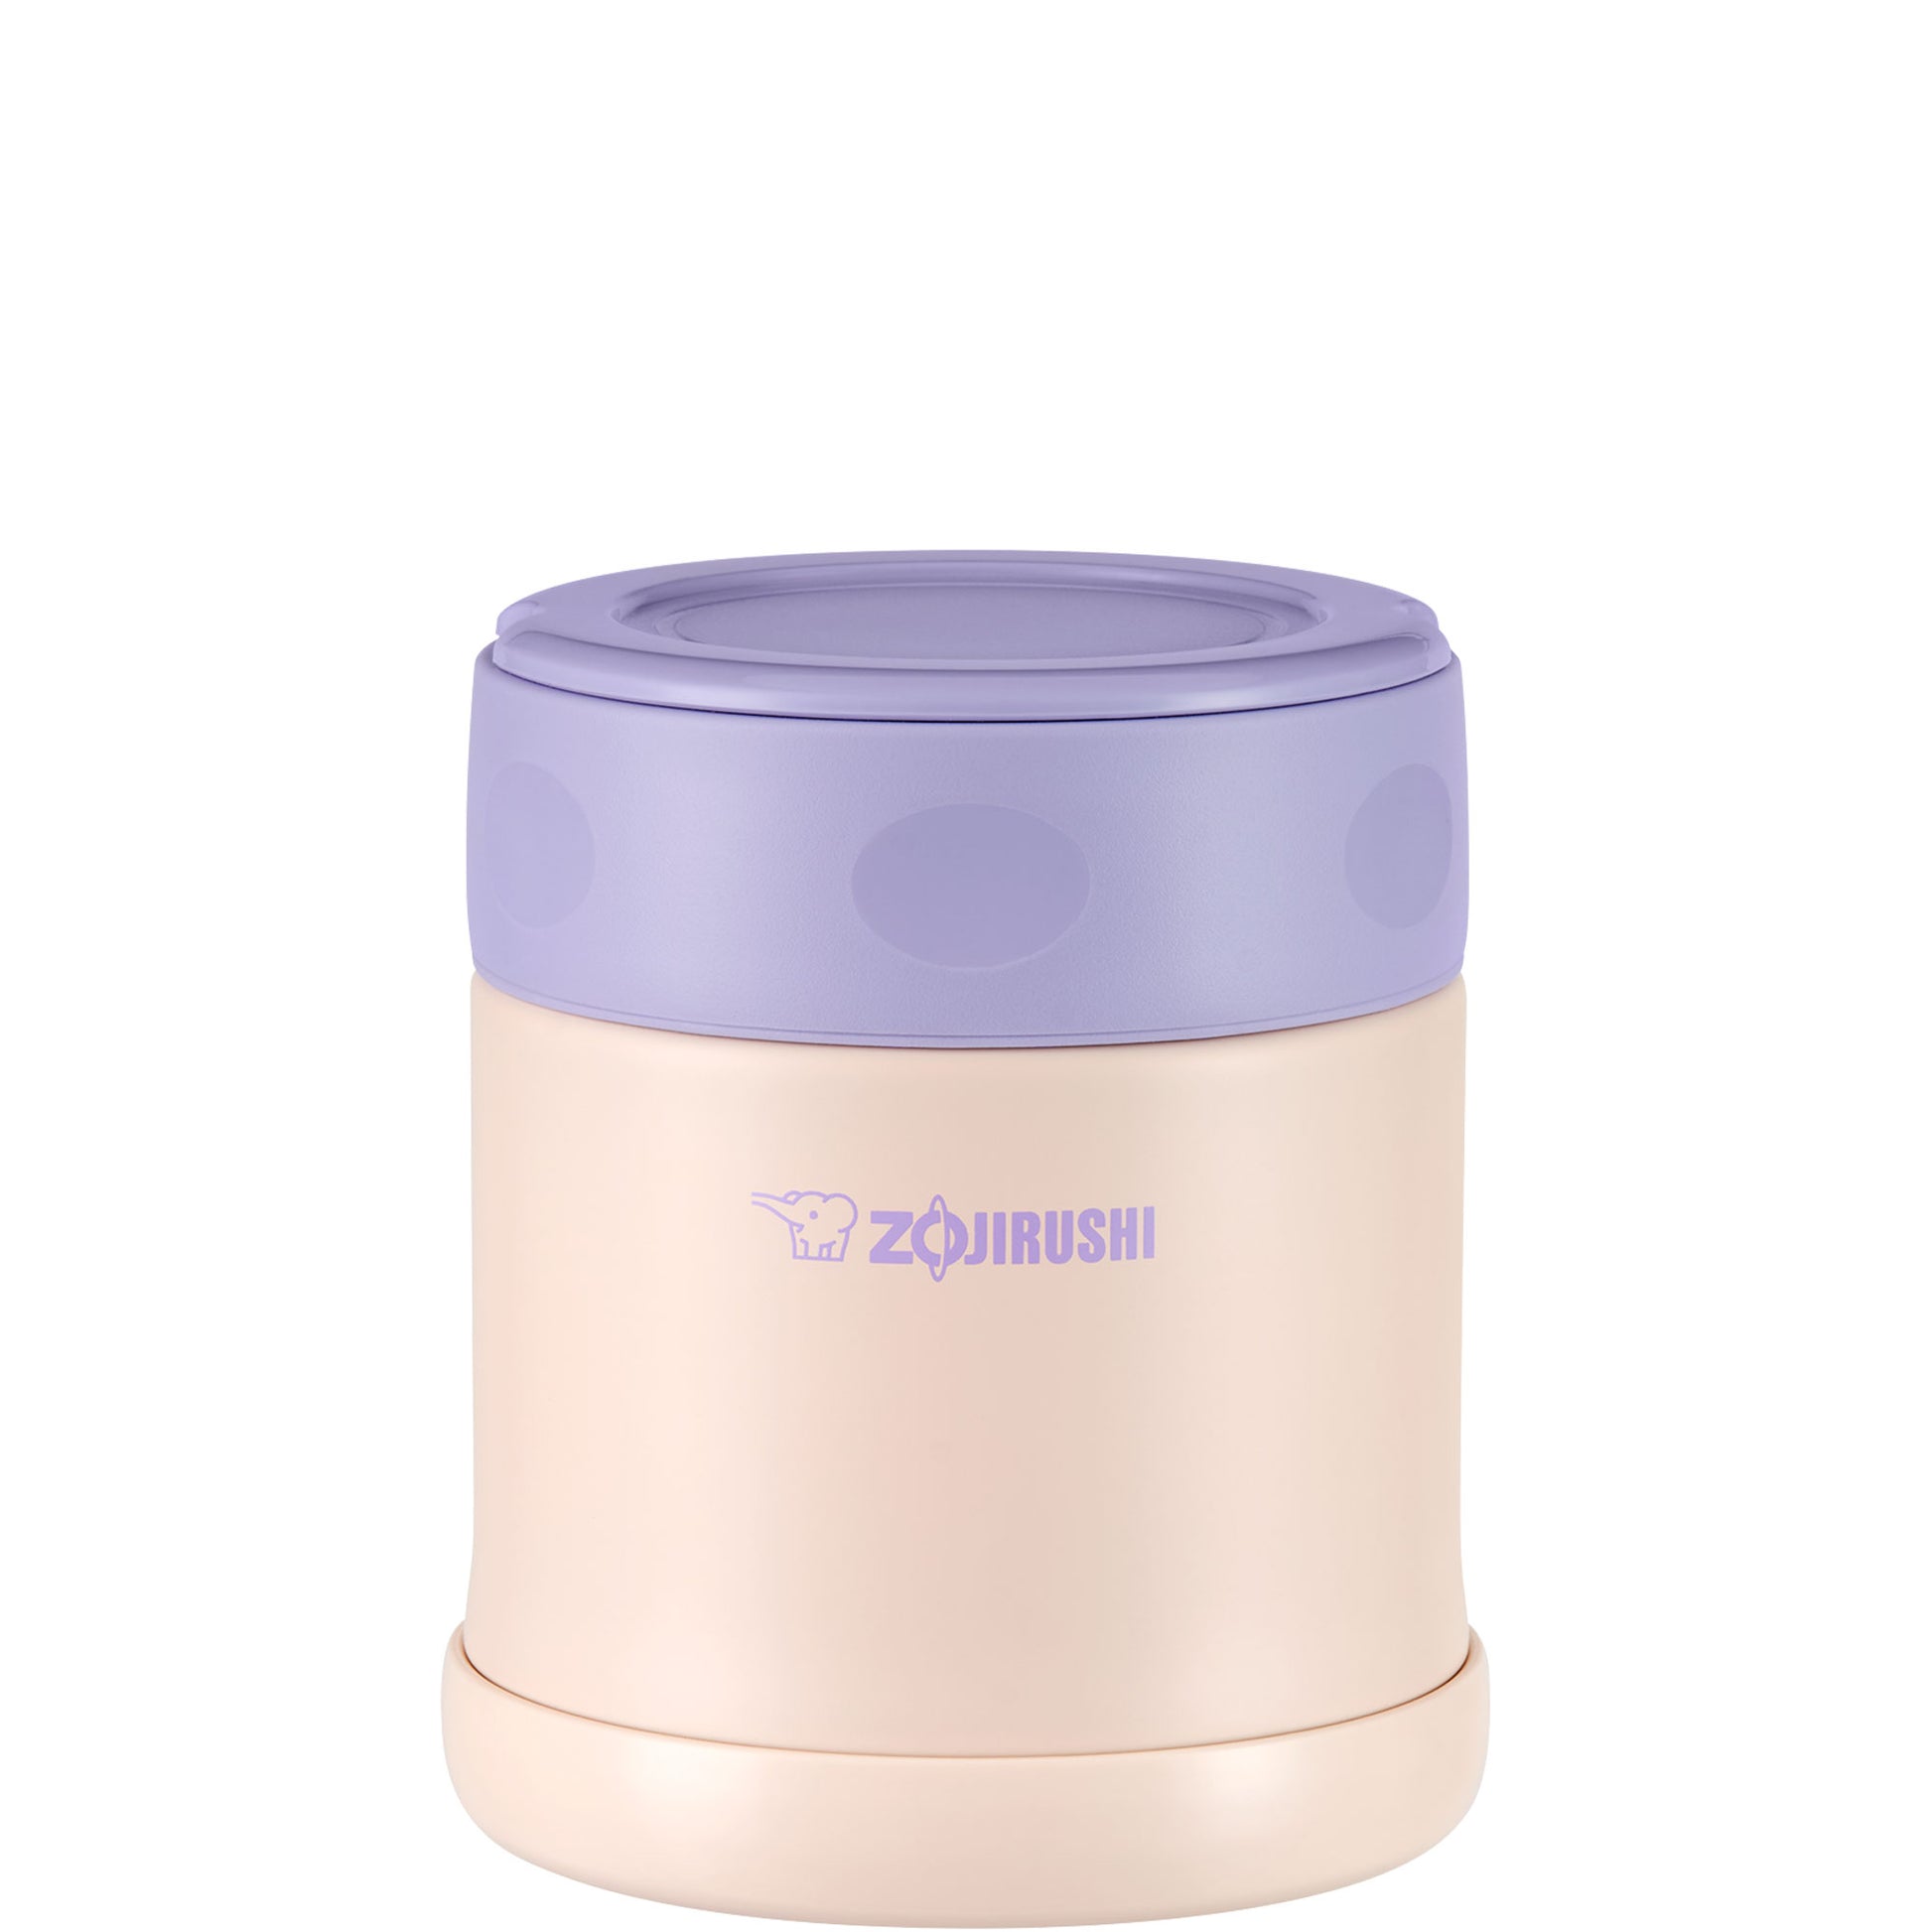 Vacuum Insulated Lunch Boxes - Zojirushi Online Store